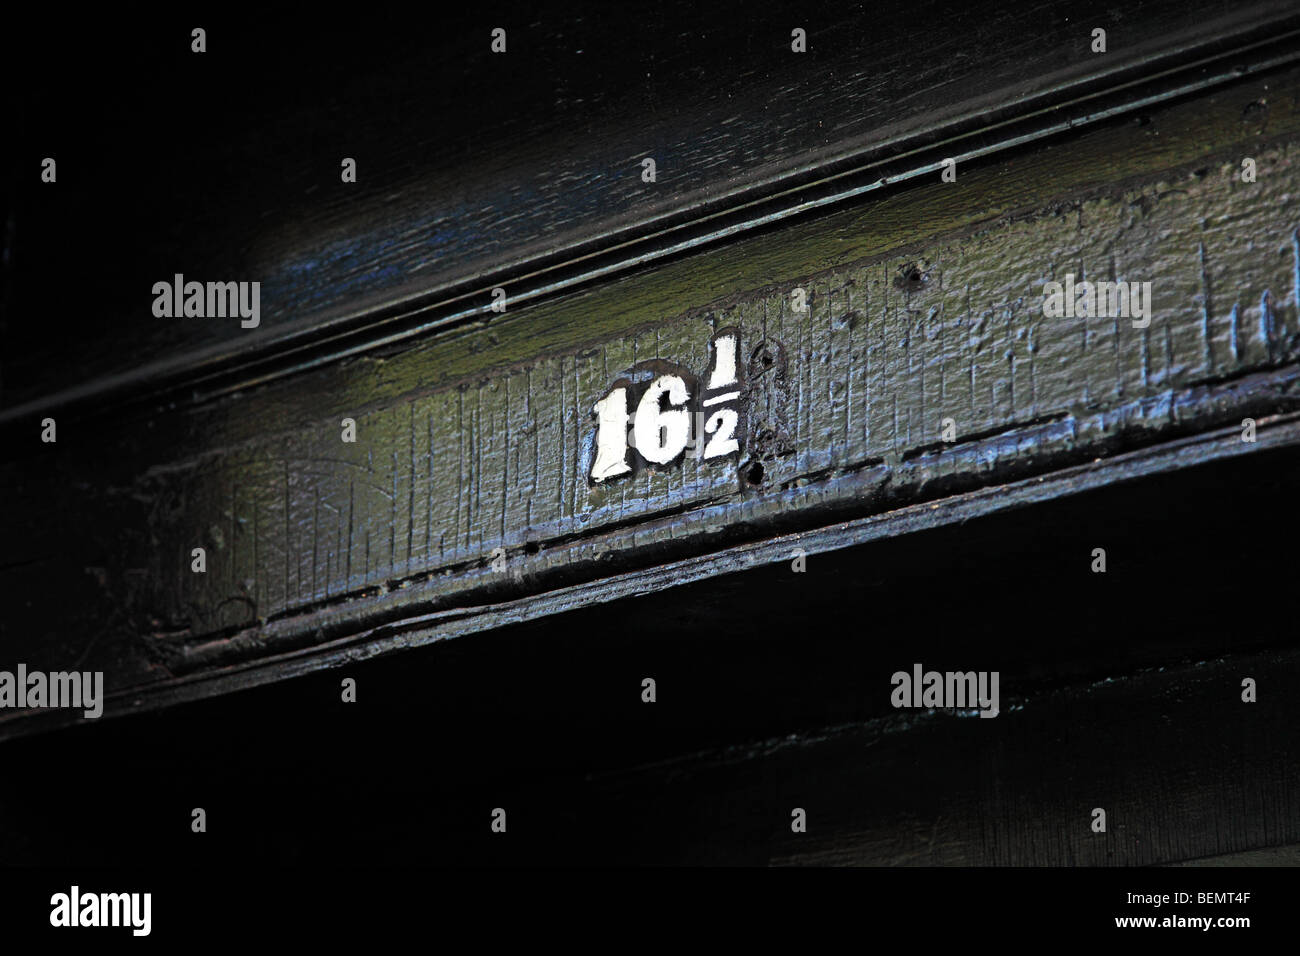 An unusual house number - sixteen and a half - on an old building in New York. Stock Photo